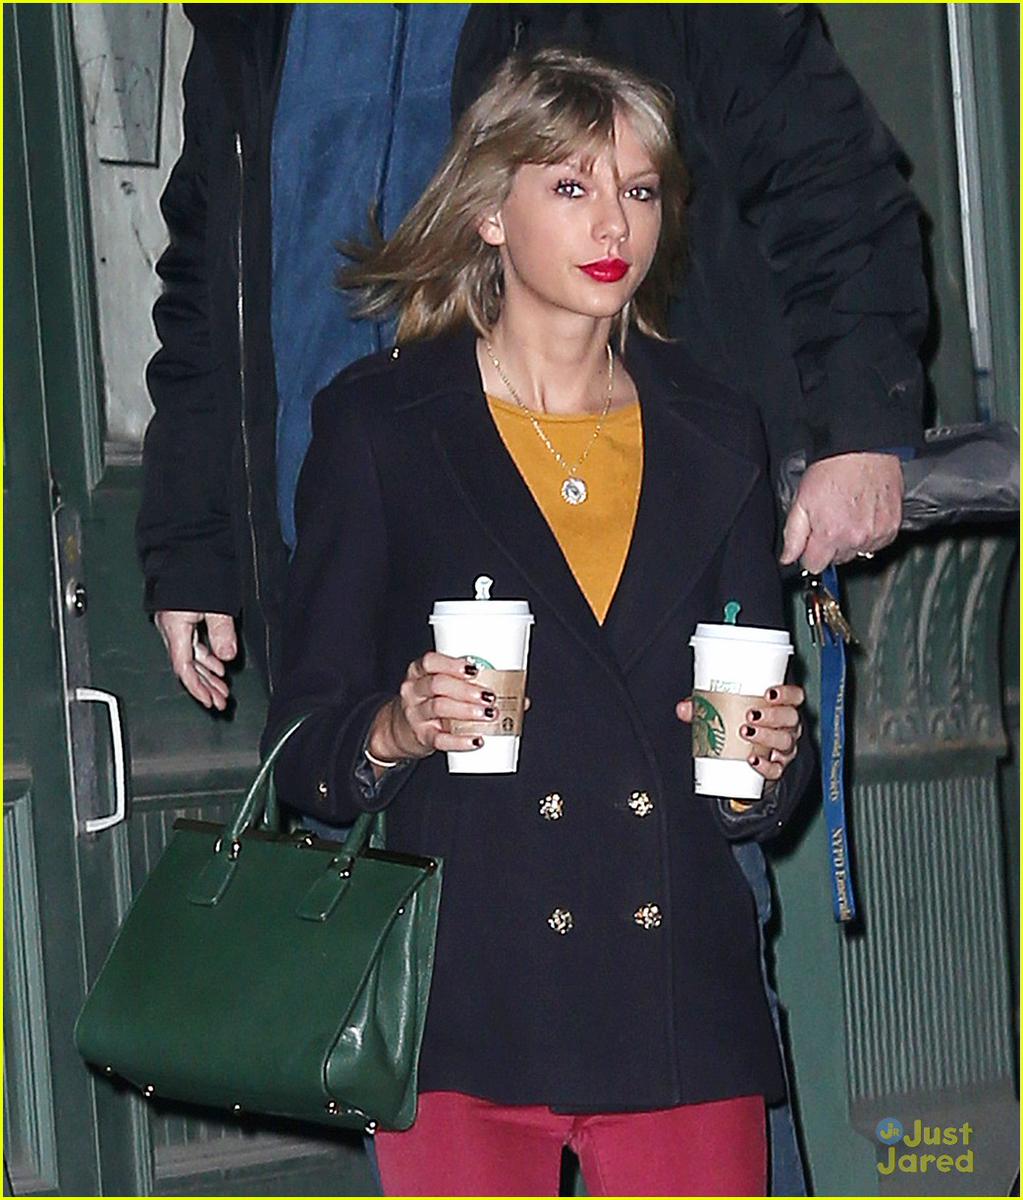 Picture of Taylor Swift in General Pictures - taylor-swift-1420650196 ...